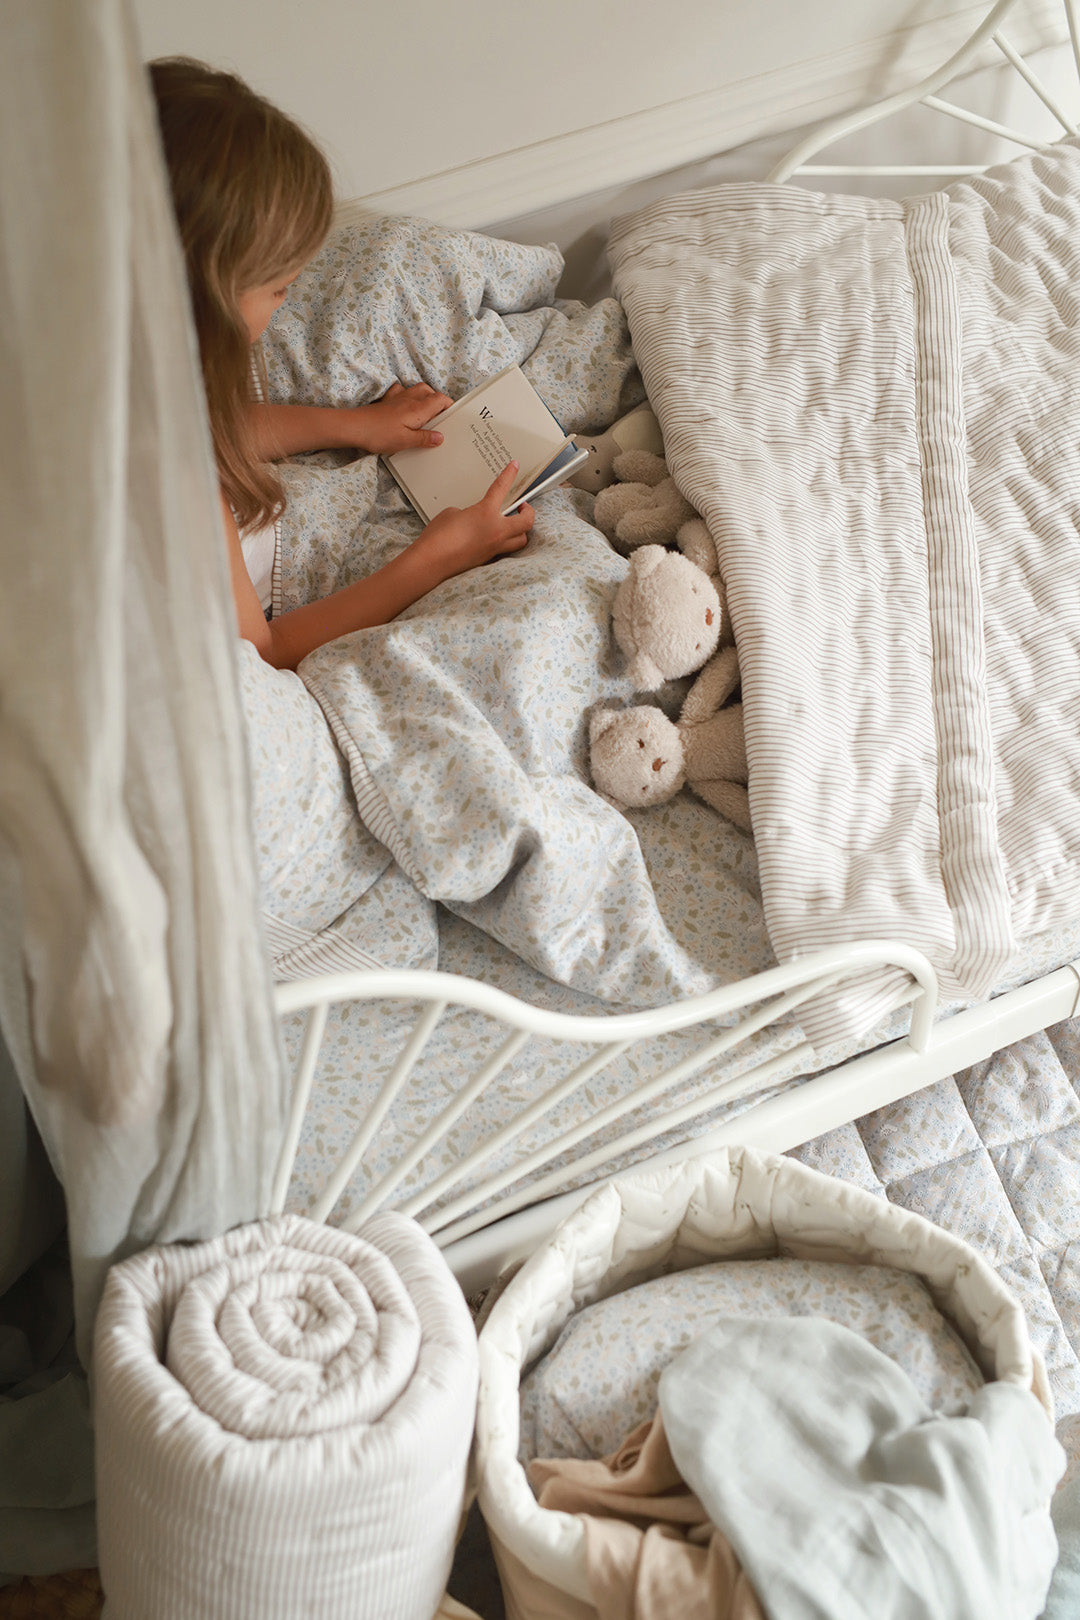 From Crib to Big Bed: Tips and Advice on Toddler Sleep Transition